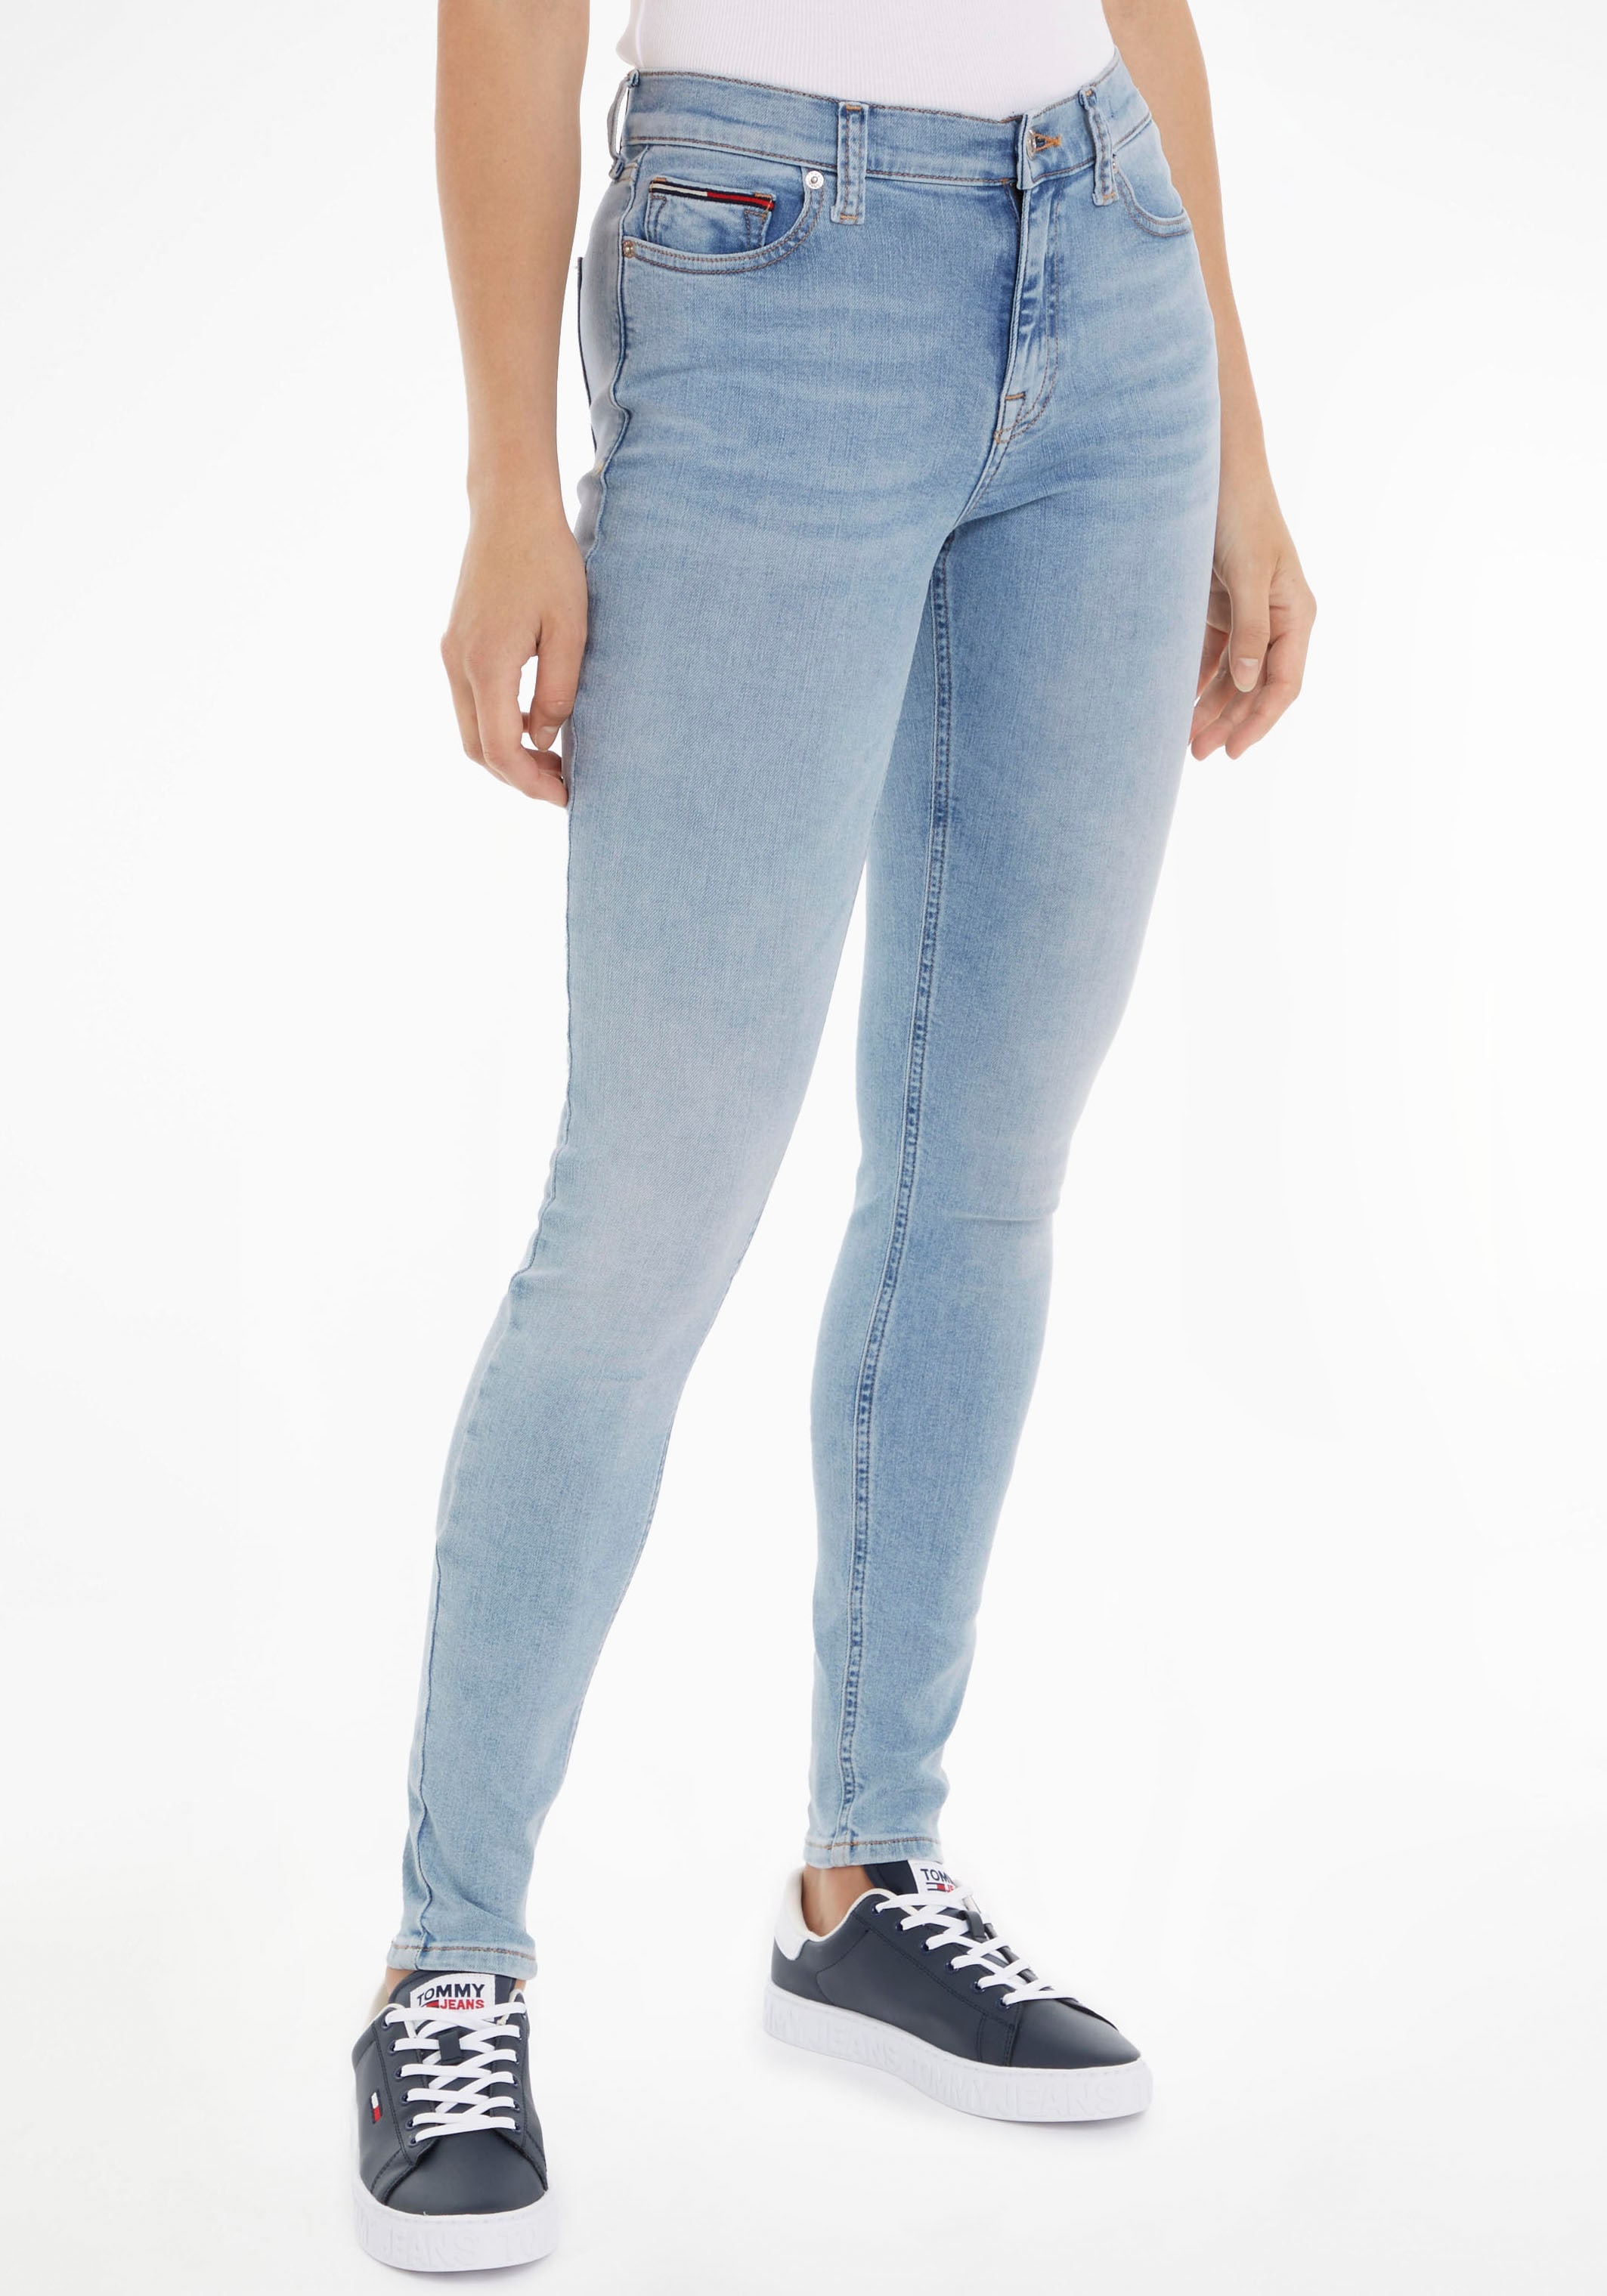 Tommy Jeans Skinny-fit-Jeans »Nora«, mit Label-Badge Tommy I\'m hinten & walking | Passe Jeans shoppen